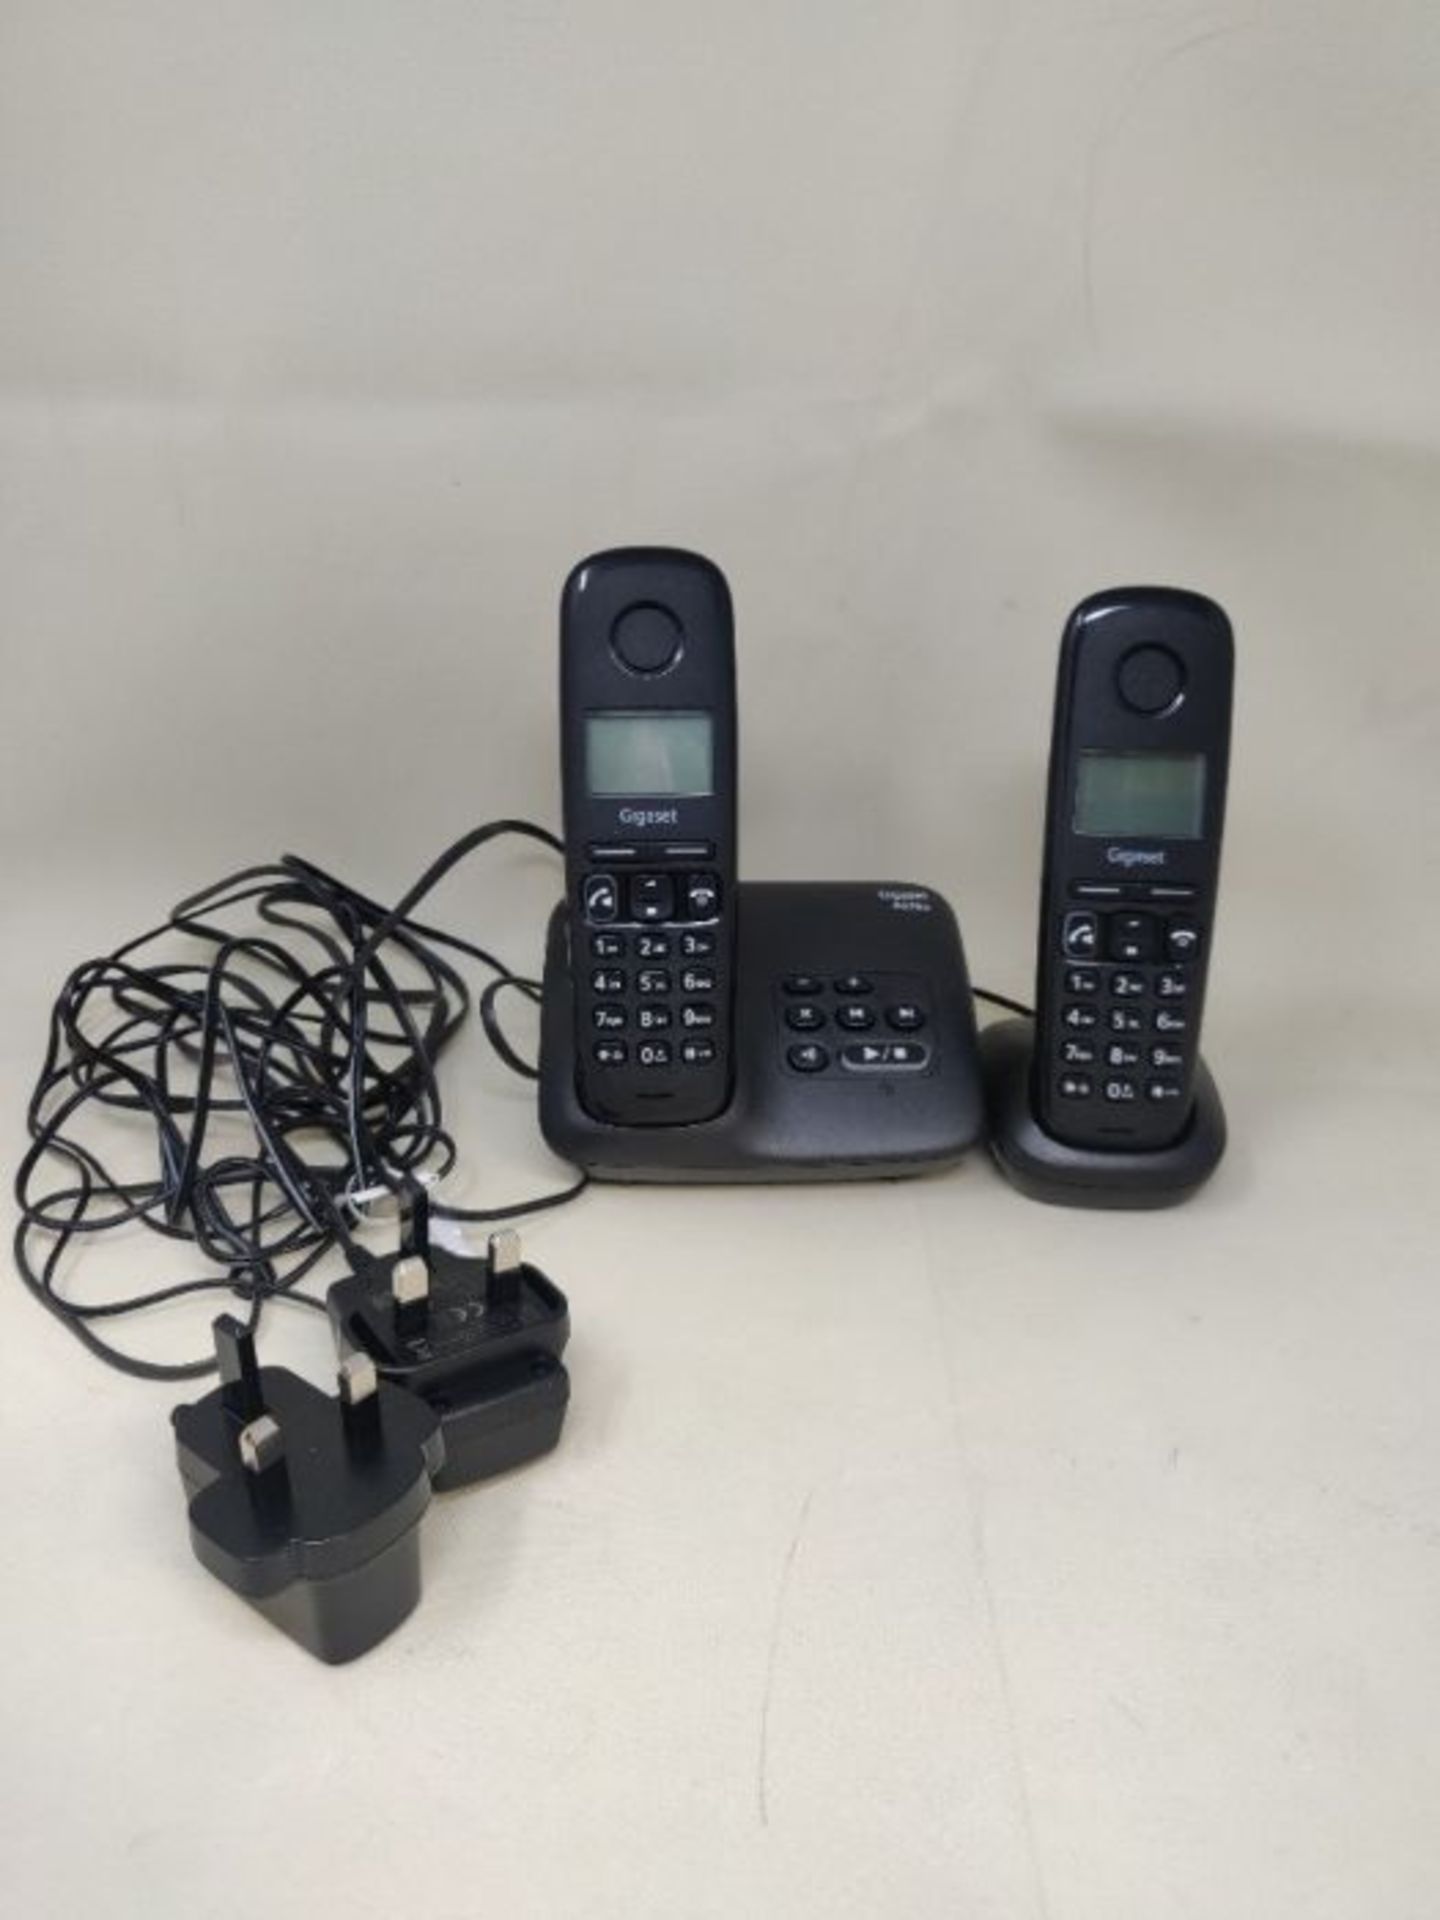 Gigaset A270A DUO - Basic Cordless Home Phone with Big Display, Answer Machine and Spe - Image 2 of 2